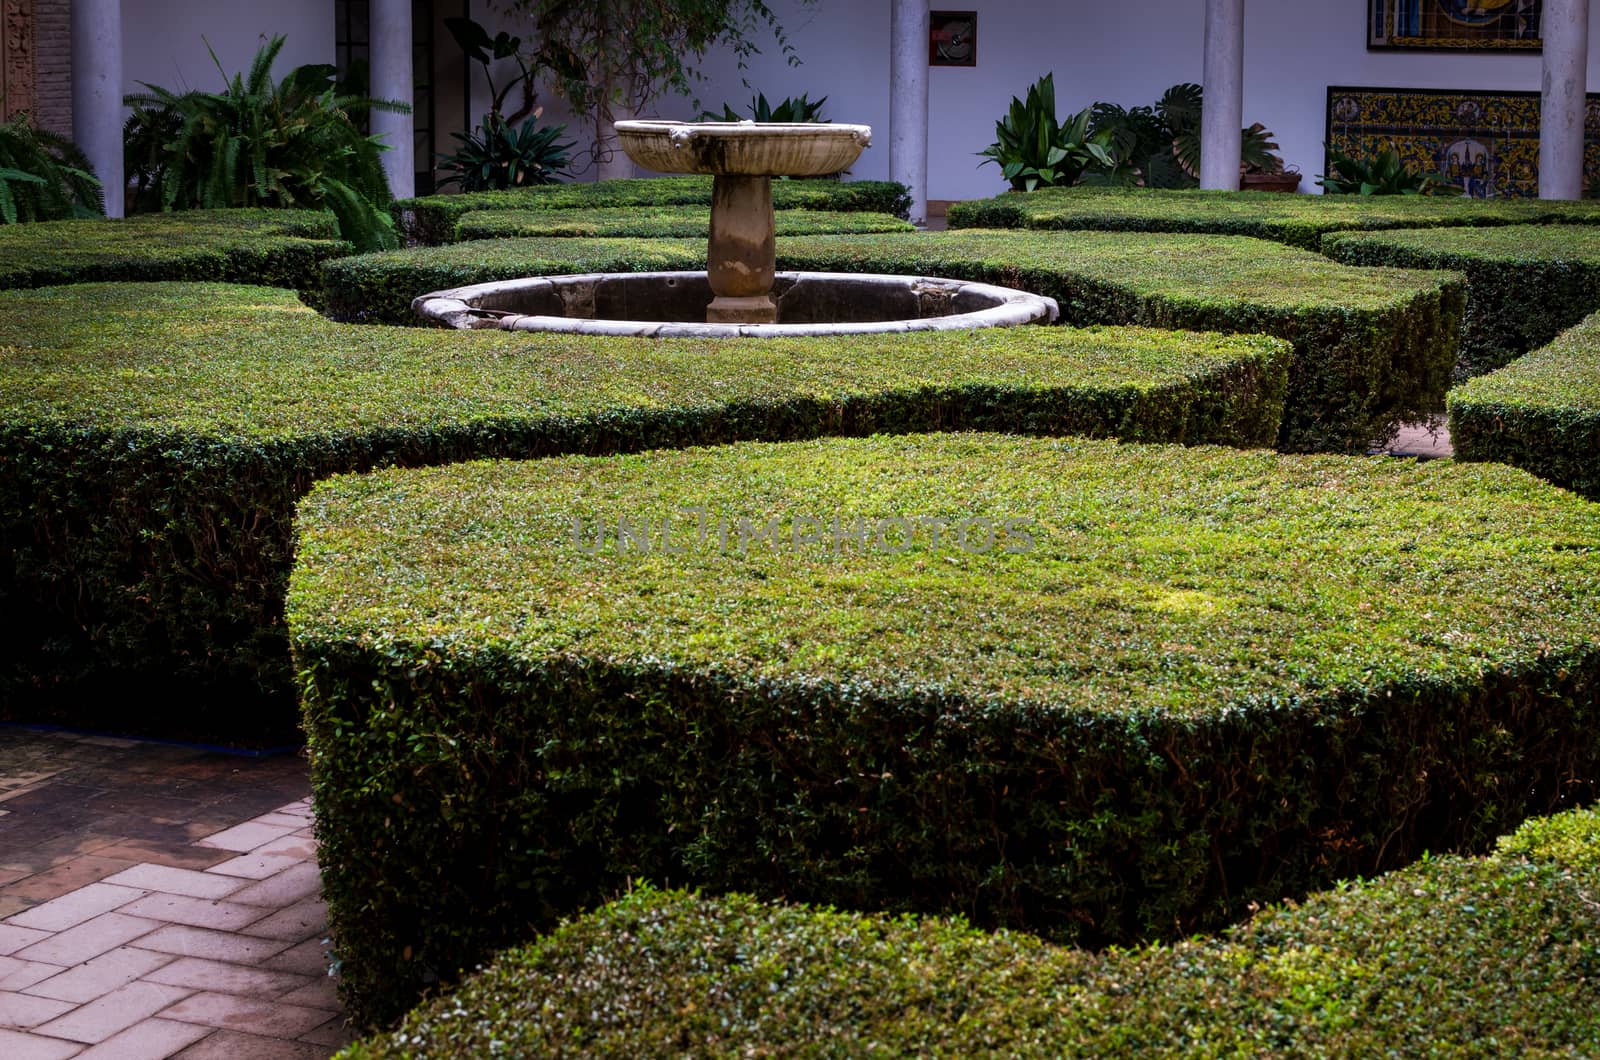 Hexagonal and other geometrical shape bushes form a little laberint around a water fountain